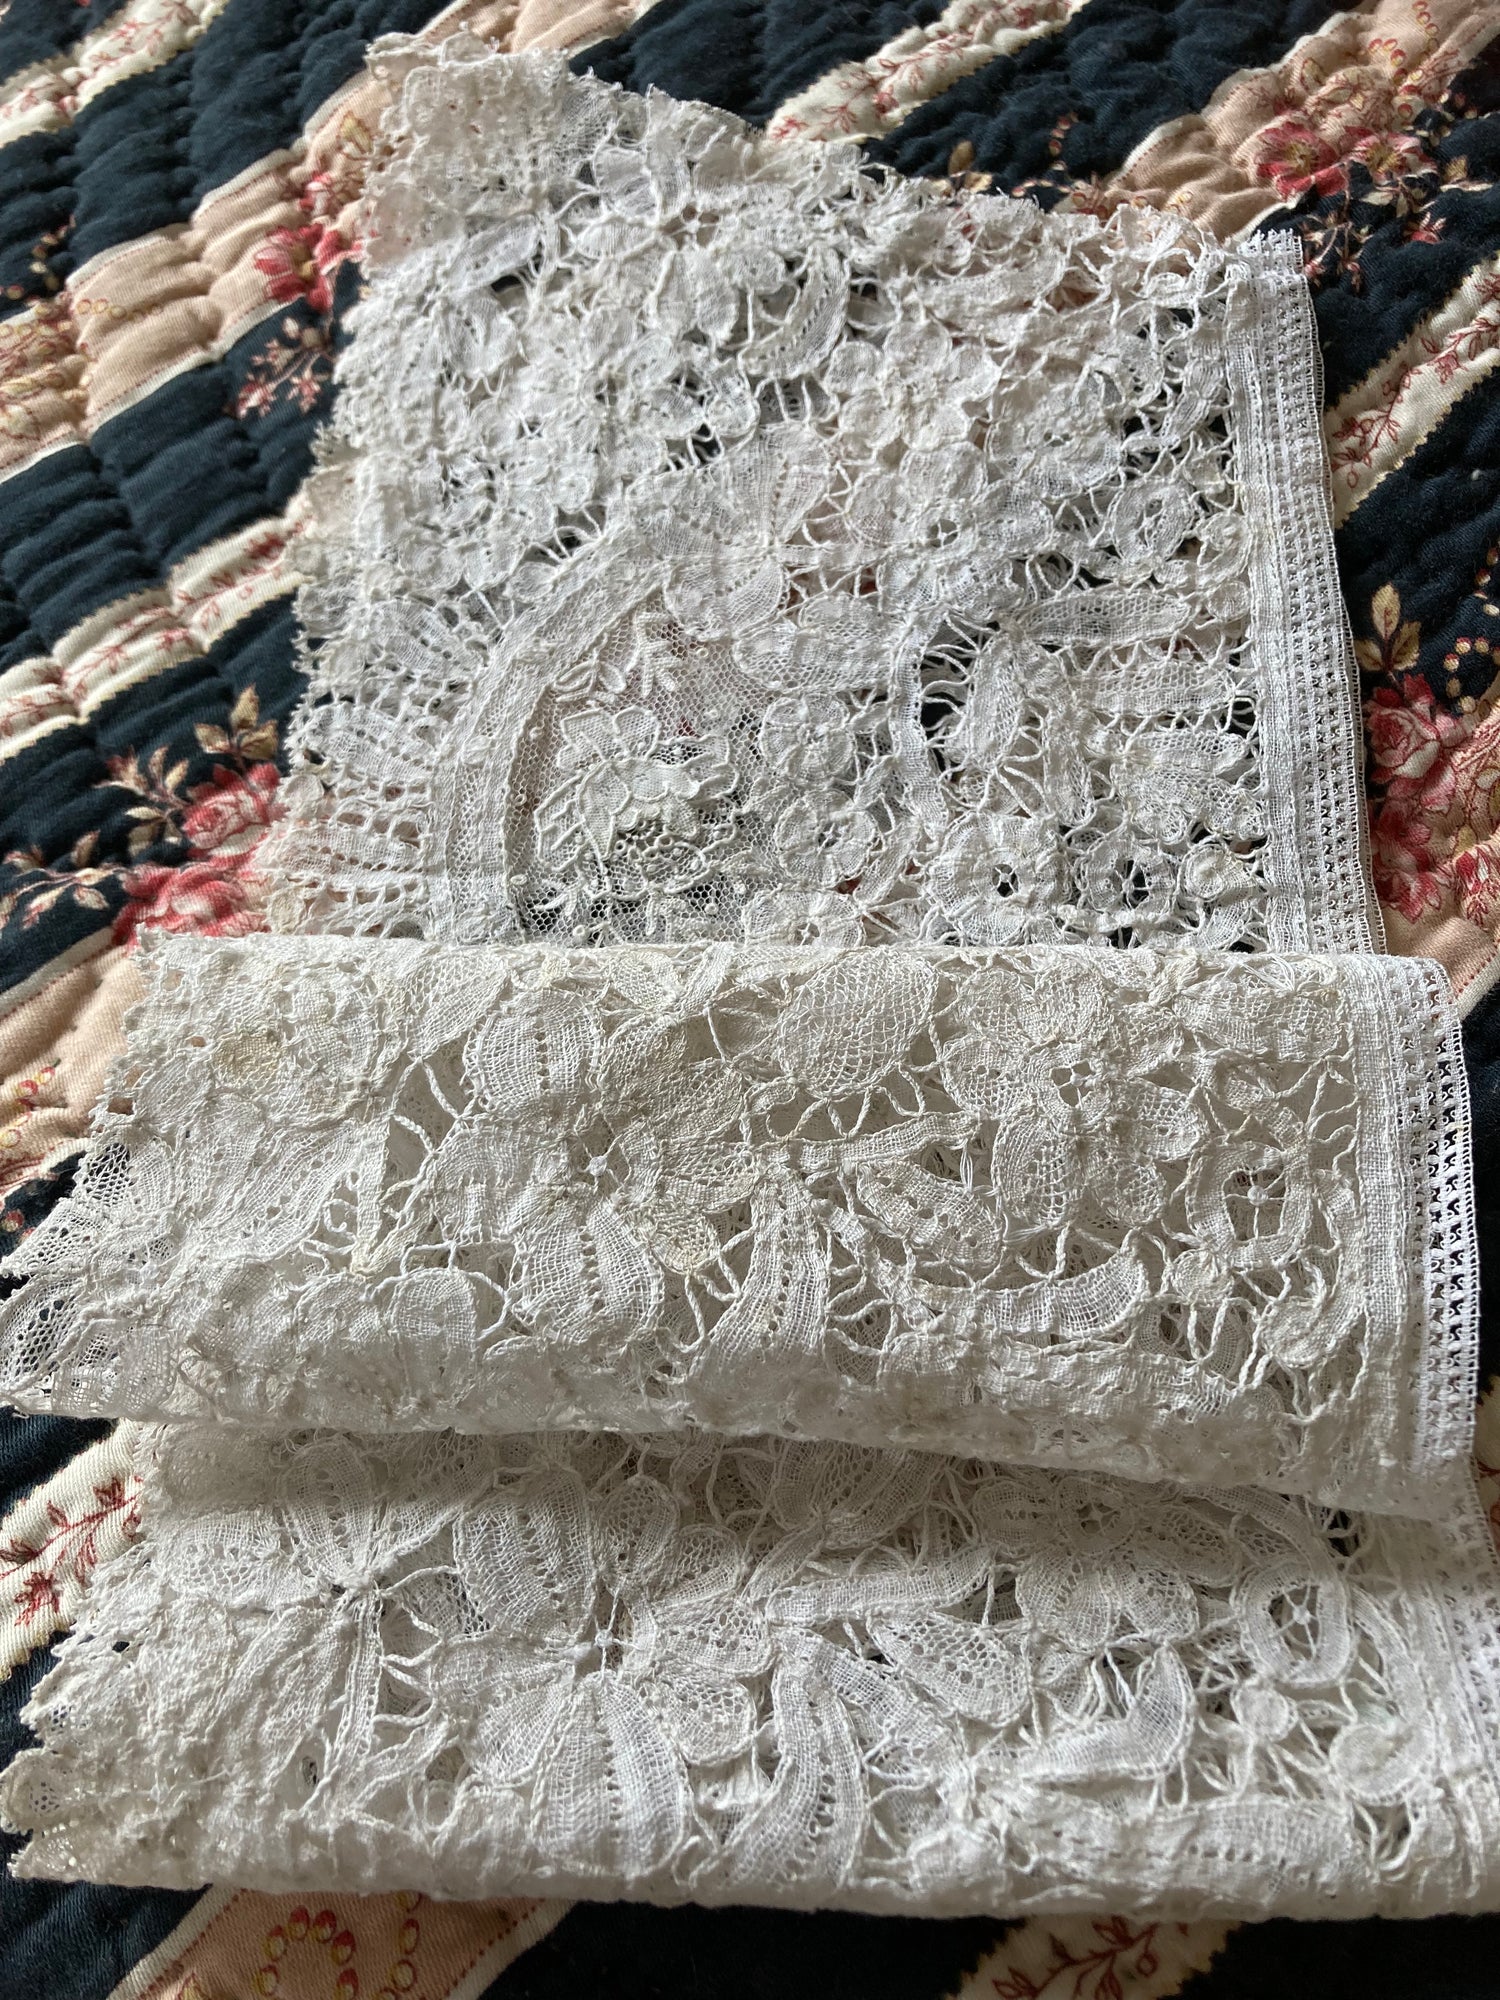 Antique Lace and frippery